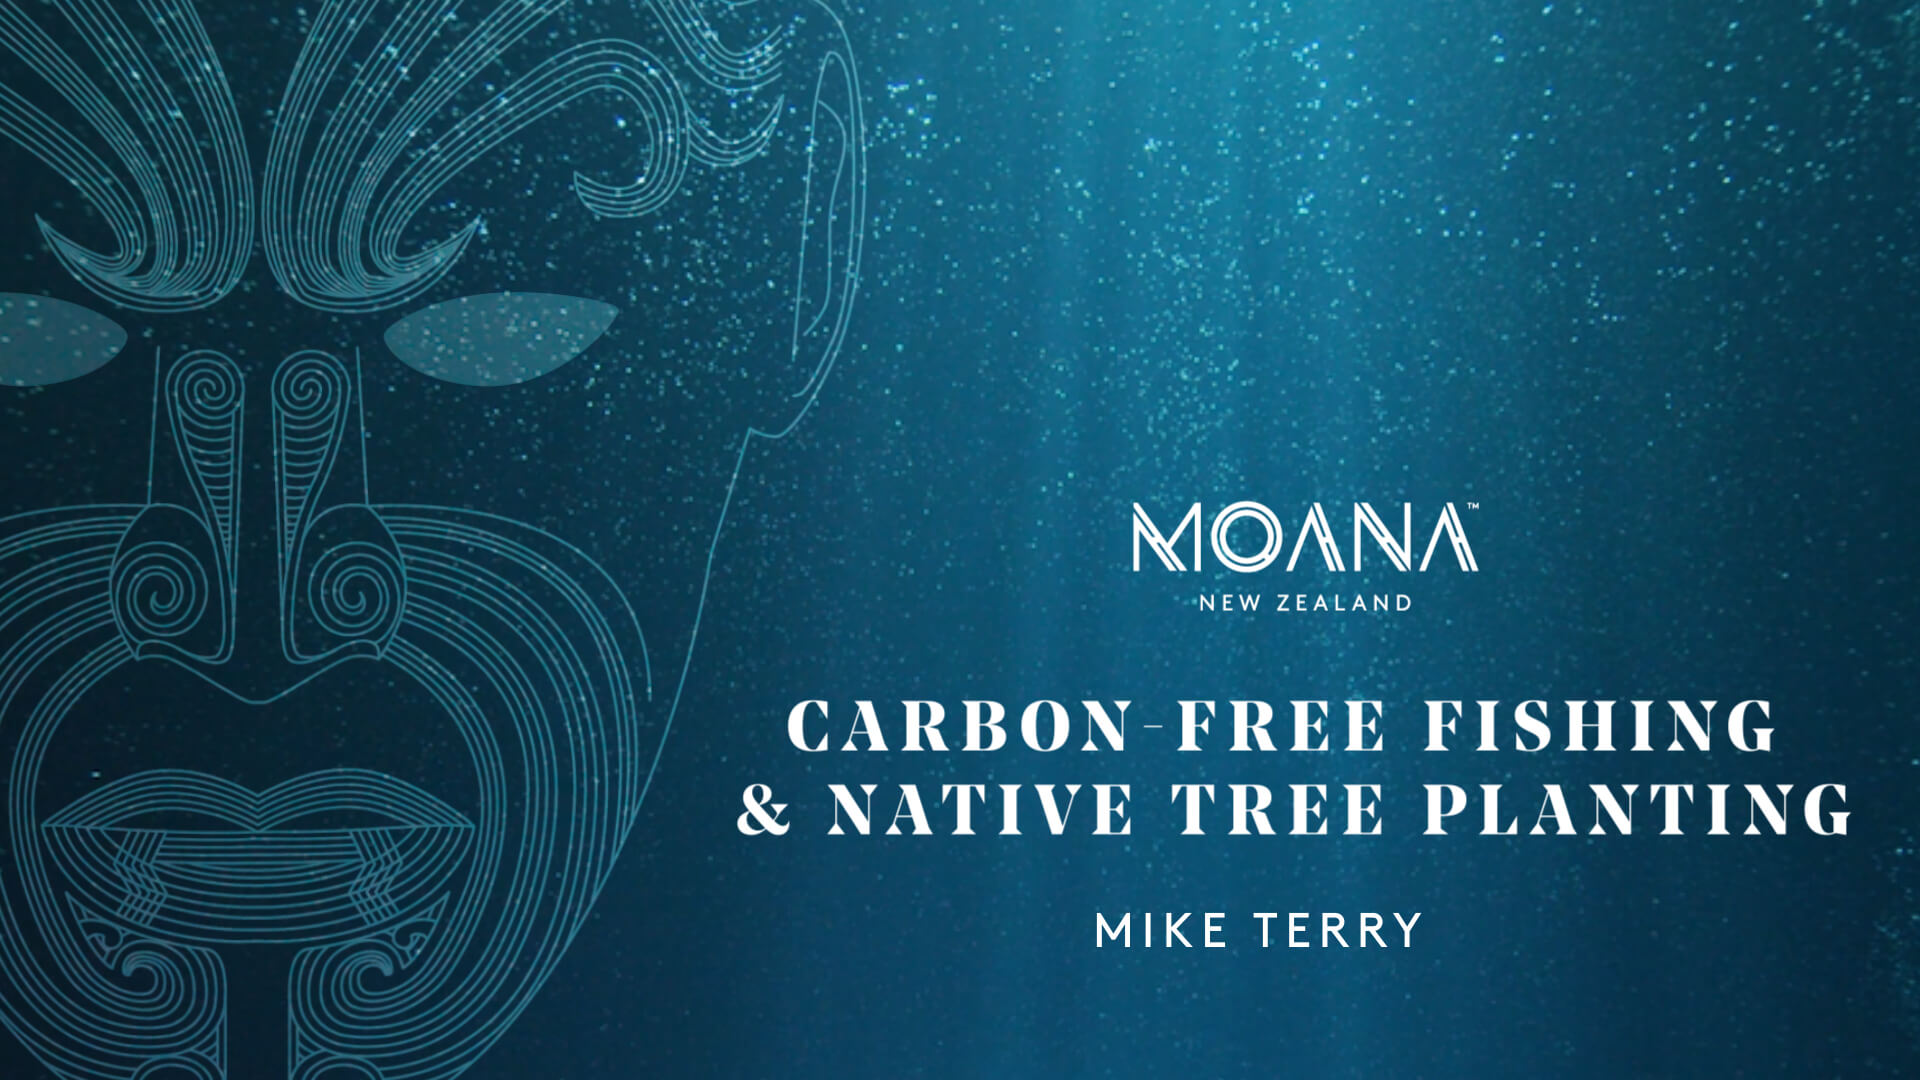 Video: Native tree planting and carbon-free fishing with Mike Terry